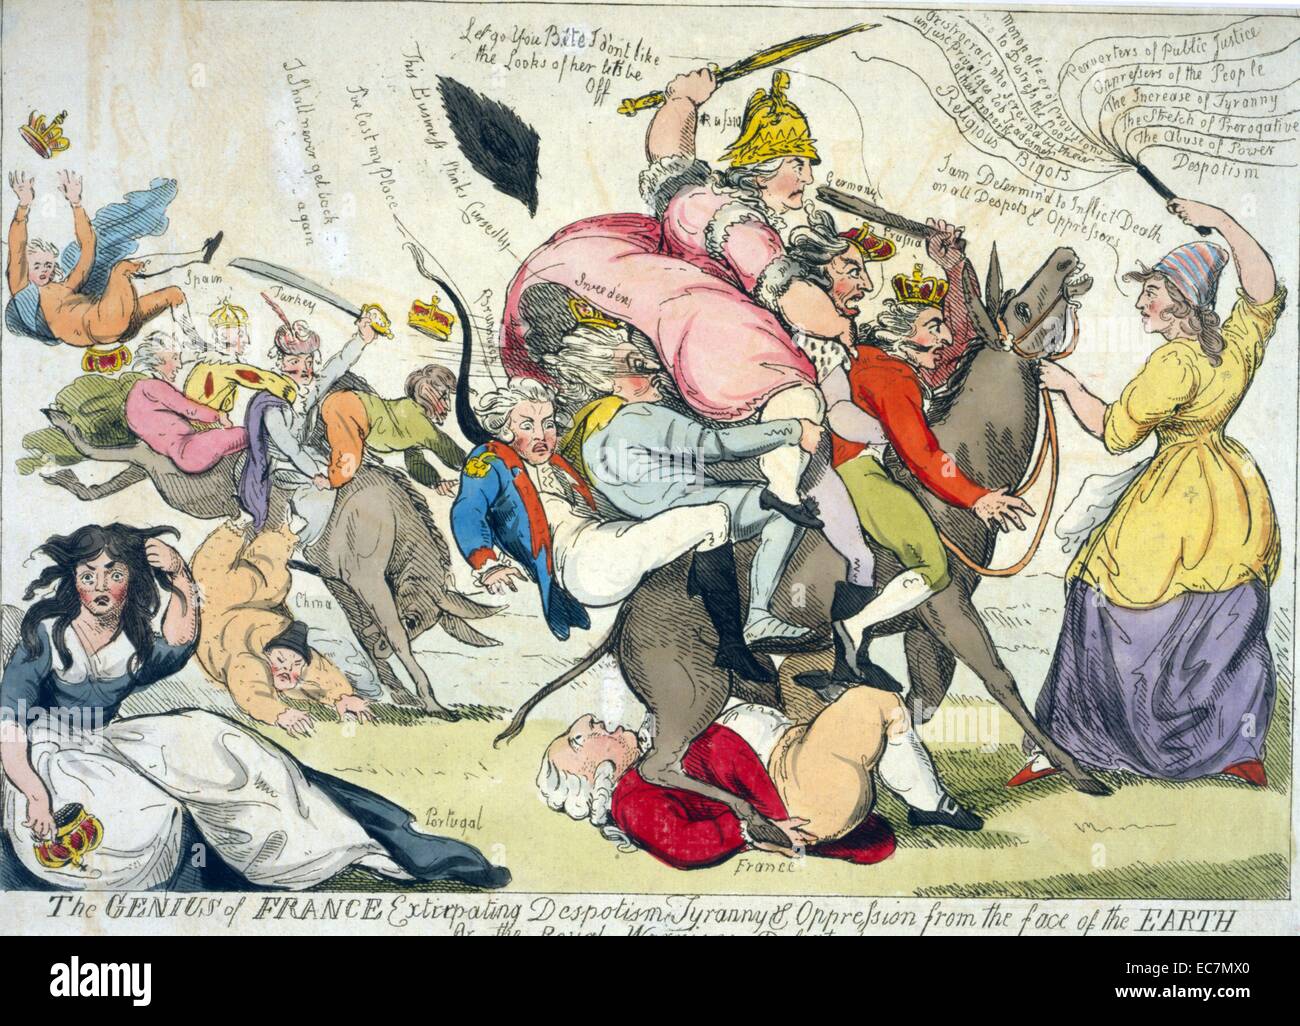 The genius of France extirpating despotism tyranny & oppression from the face of the earth Or the royal warriors defeated. Cartoon shows a woman wearing a liberty cap, representing the genius of France, holding a cat-o'-nine-tails in one hand and the reins of a donkey in the other. Stock Photo